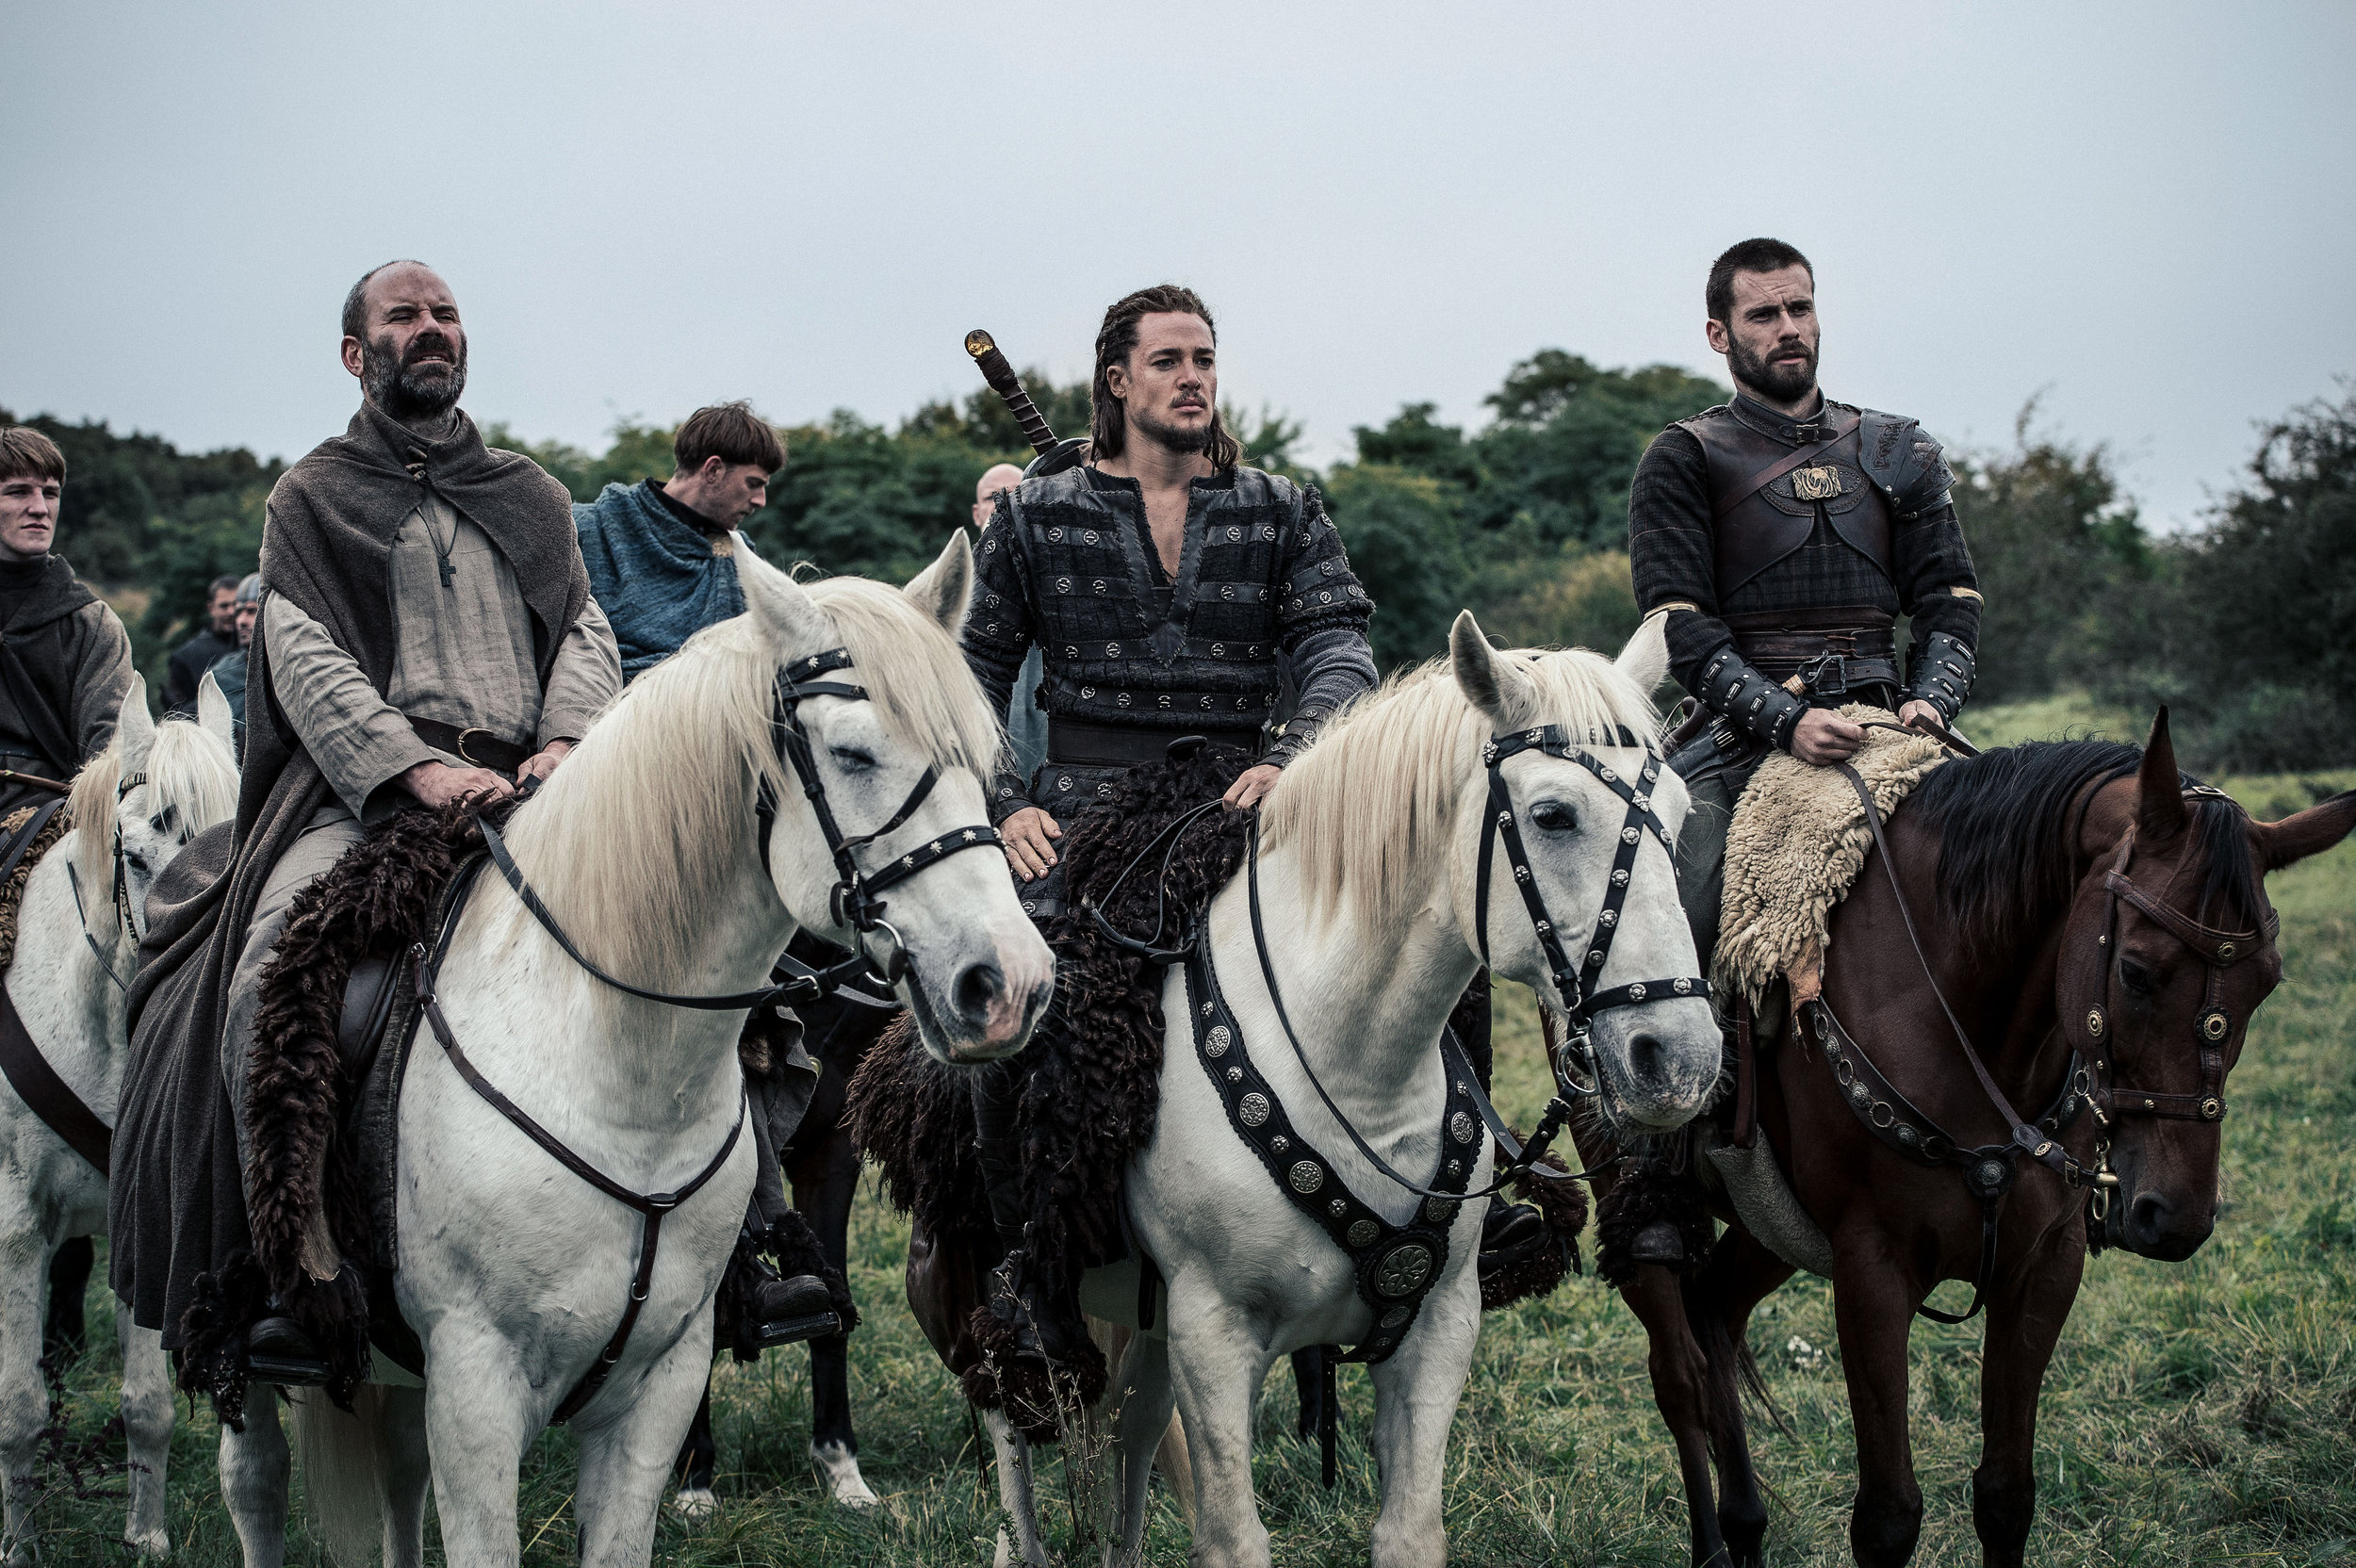 Uhtred and friends. © Carnival Film & Television Limited